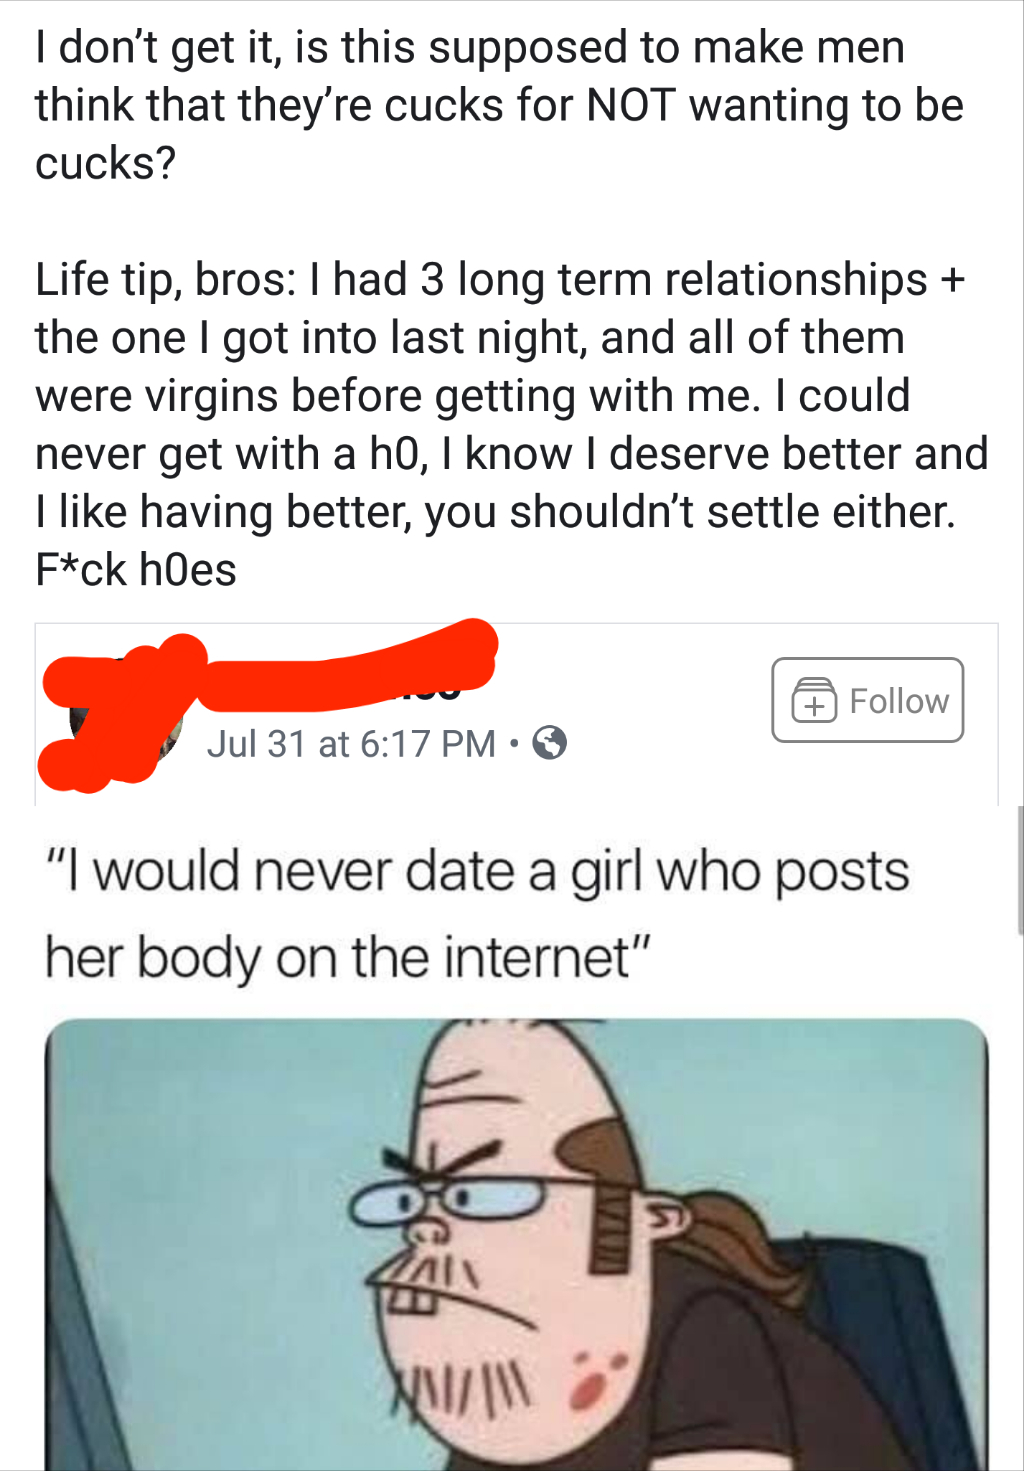 cartoon - I don't get it, is this supposed to make men think that they're cucks for Not wanting to be cucks? Life tip, bros I had 3 long term relationships the one I got into last night, and all of them were virgins before getting with me. I could never g